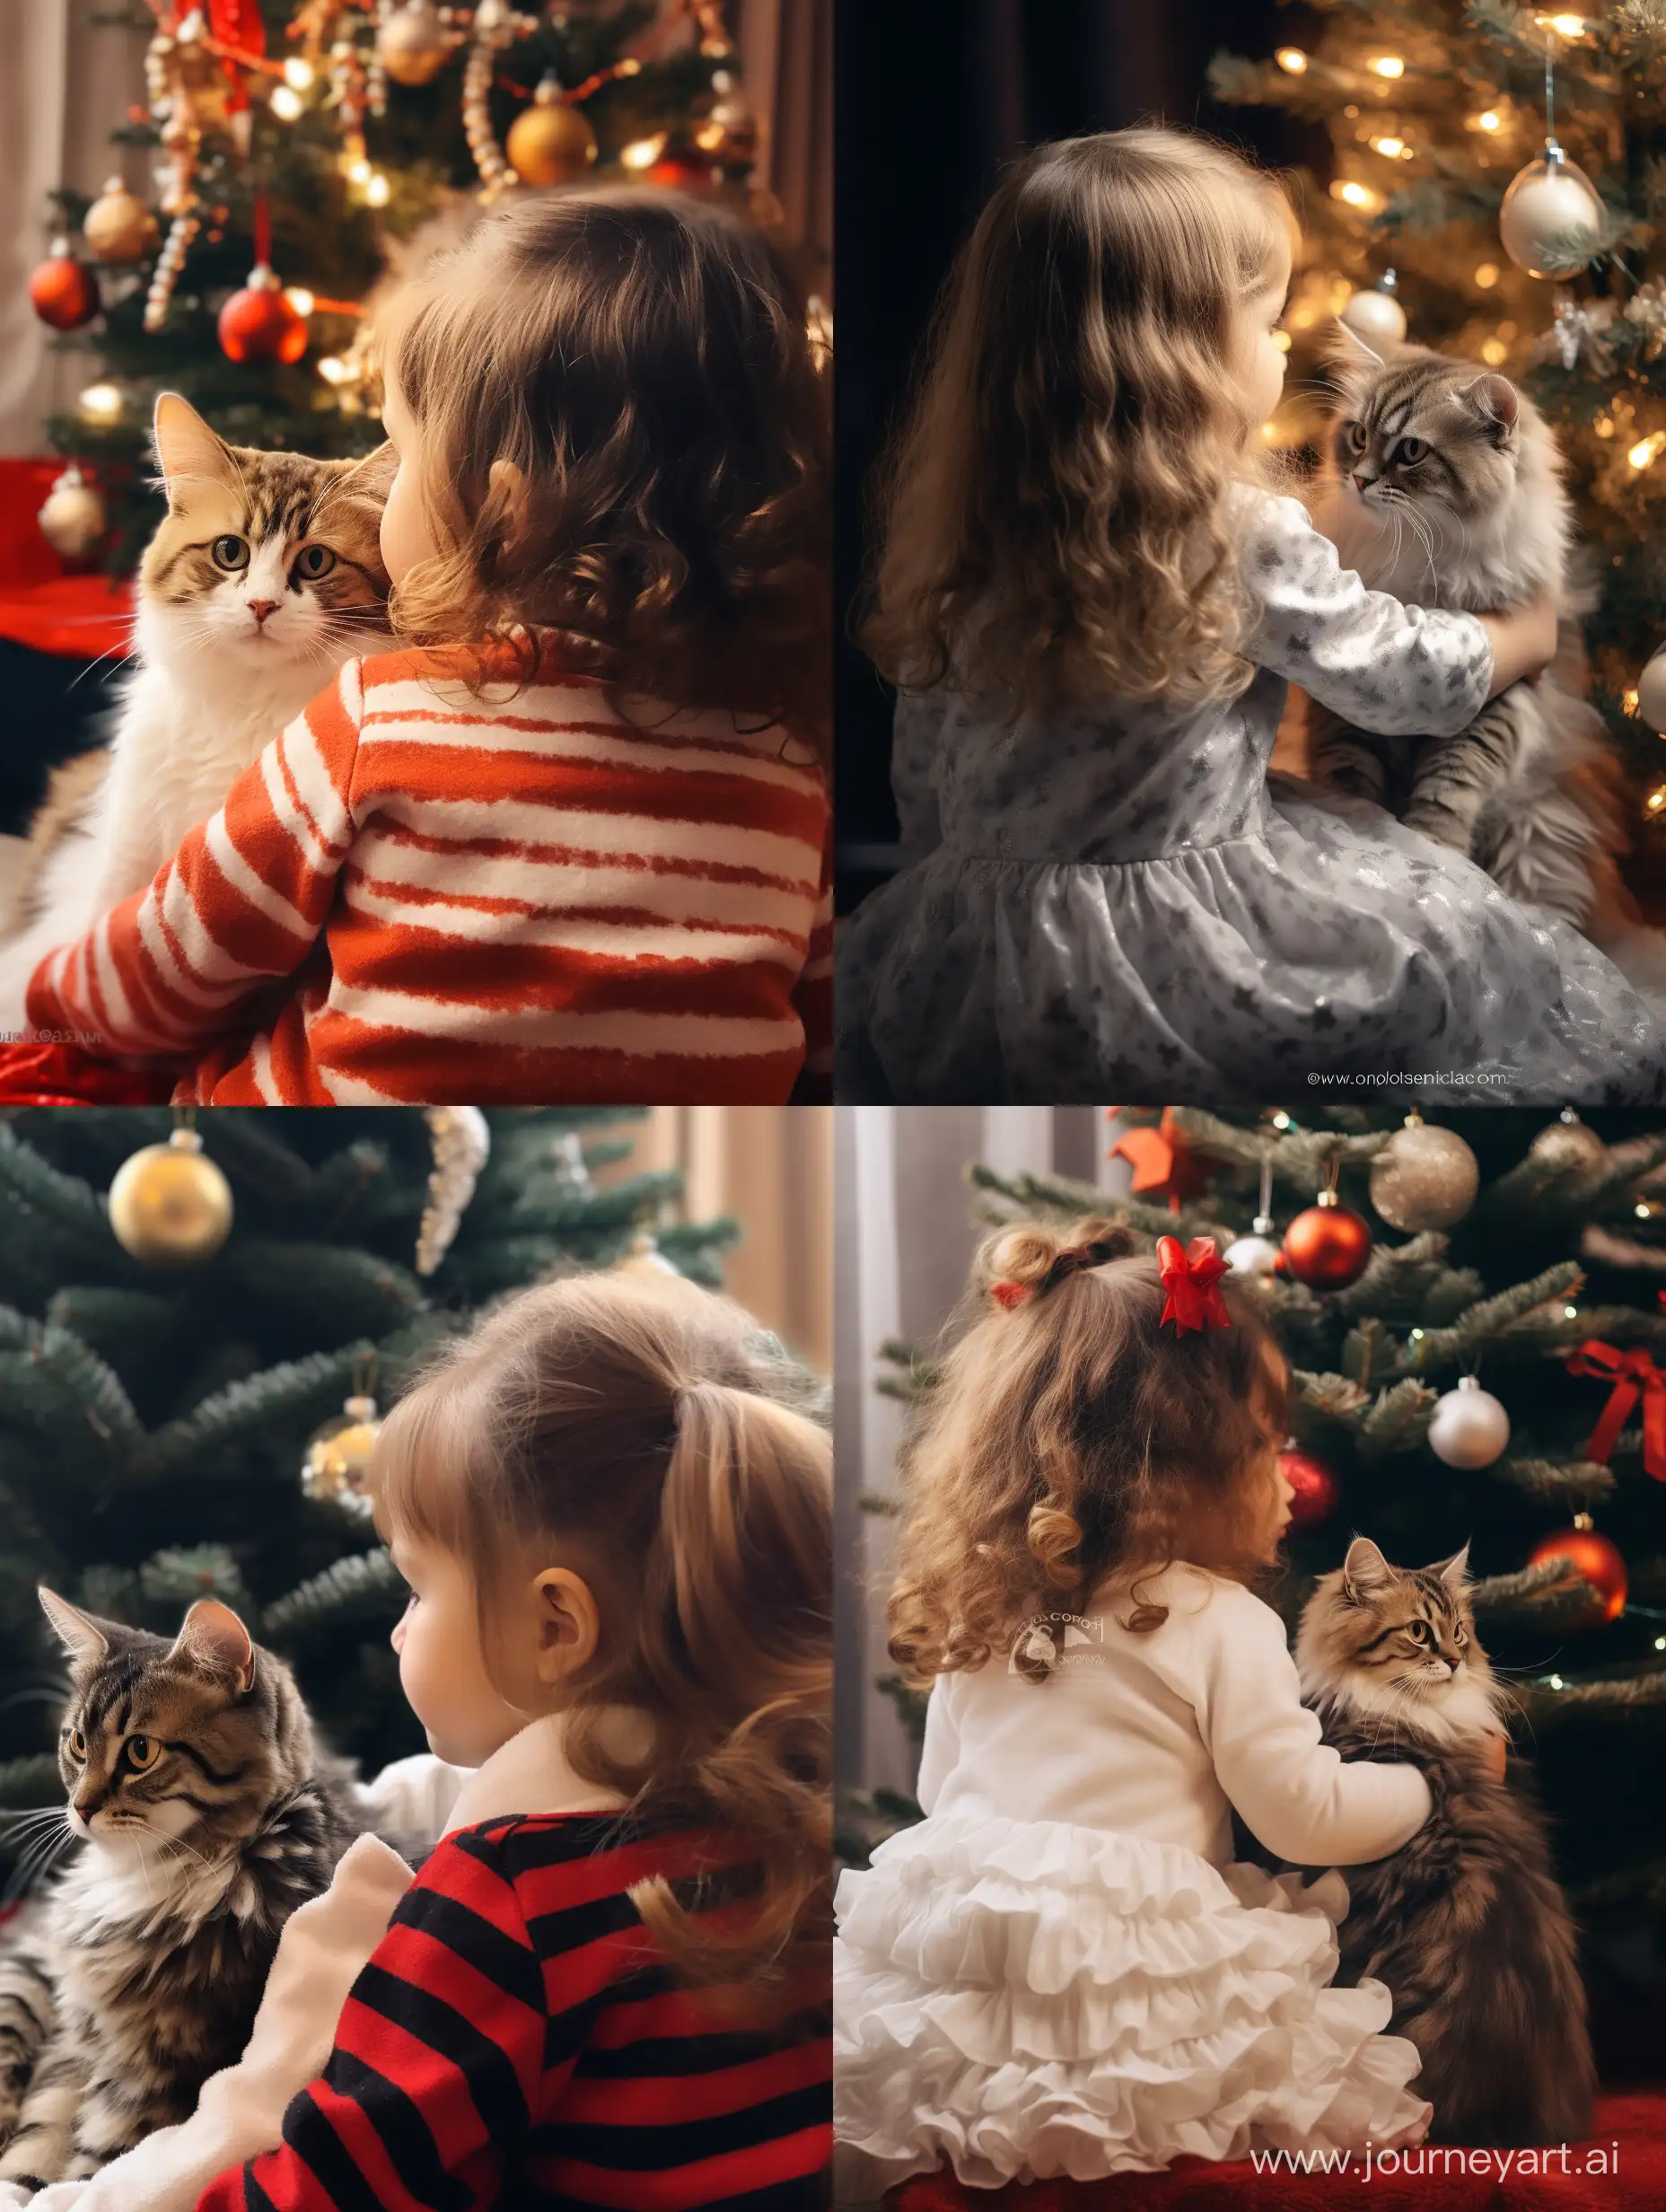 Adorable-Christmas-Moment-Little-Girl-Holding-a-Cat-by-the-Christmas-Tree